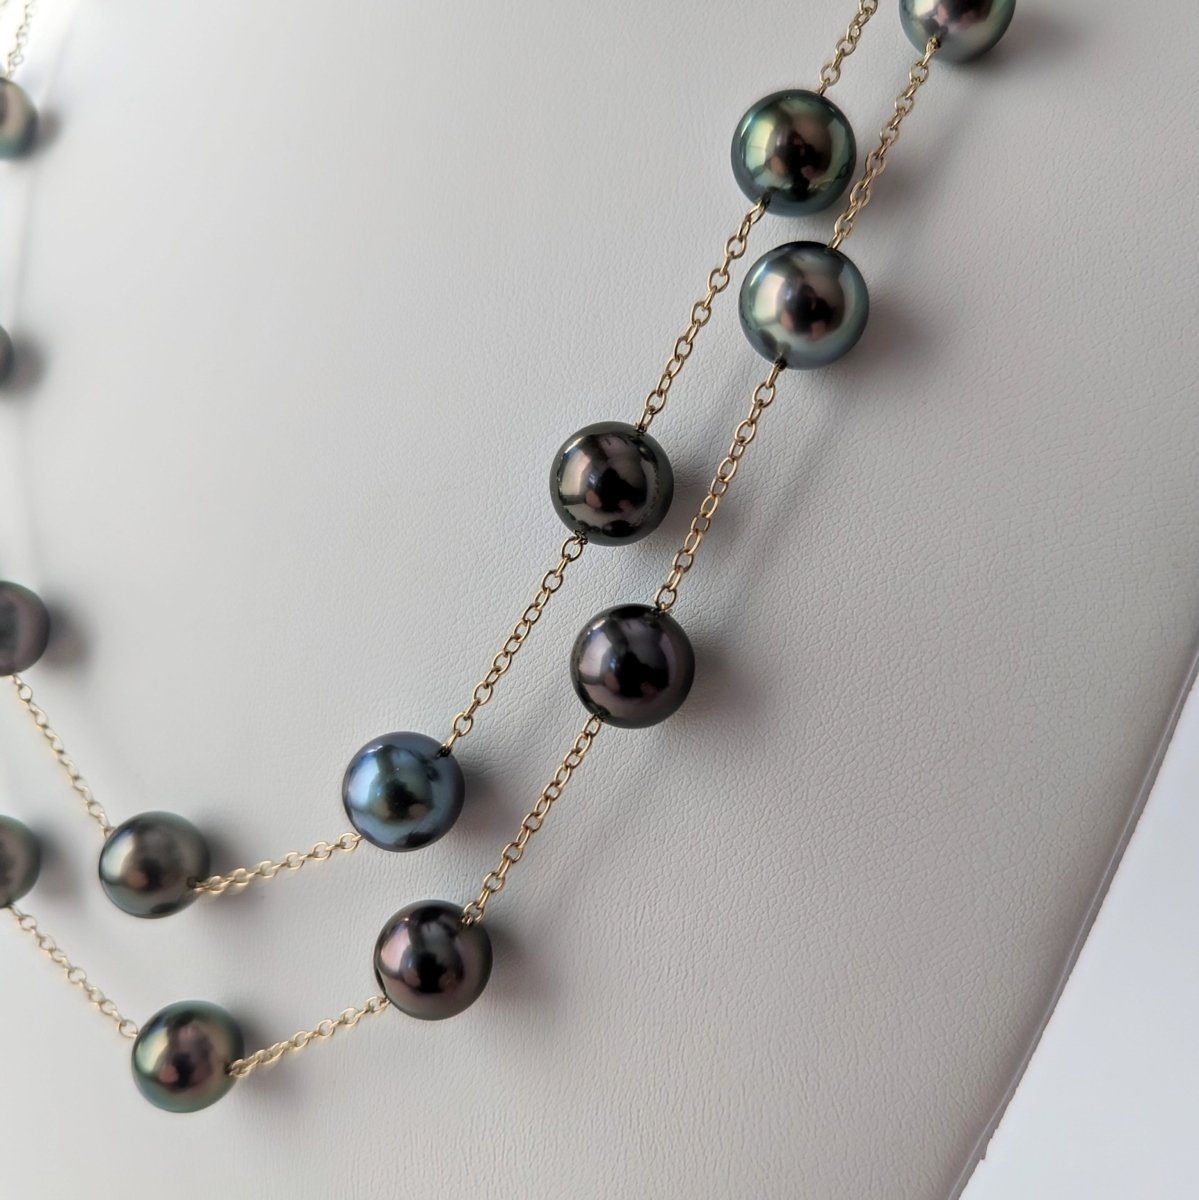 9-11mm EXCEPTIONAL Round Tahitian Pearl Station Long Necklace - Marina Korneev Fine Pearls